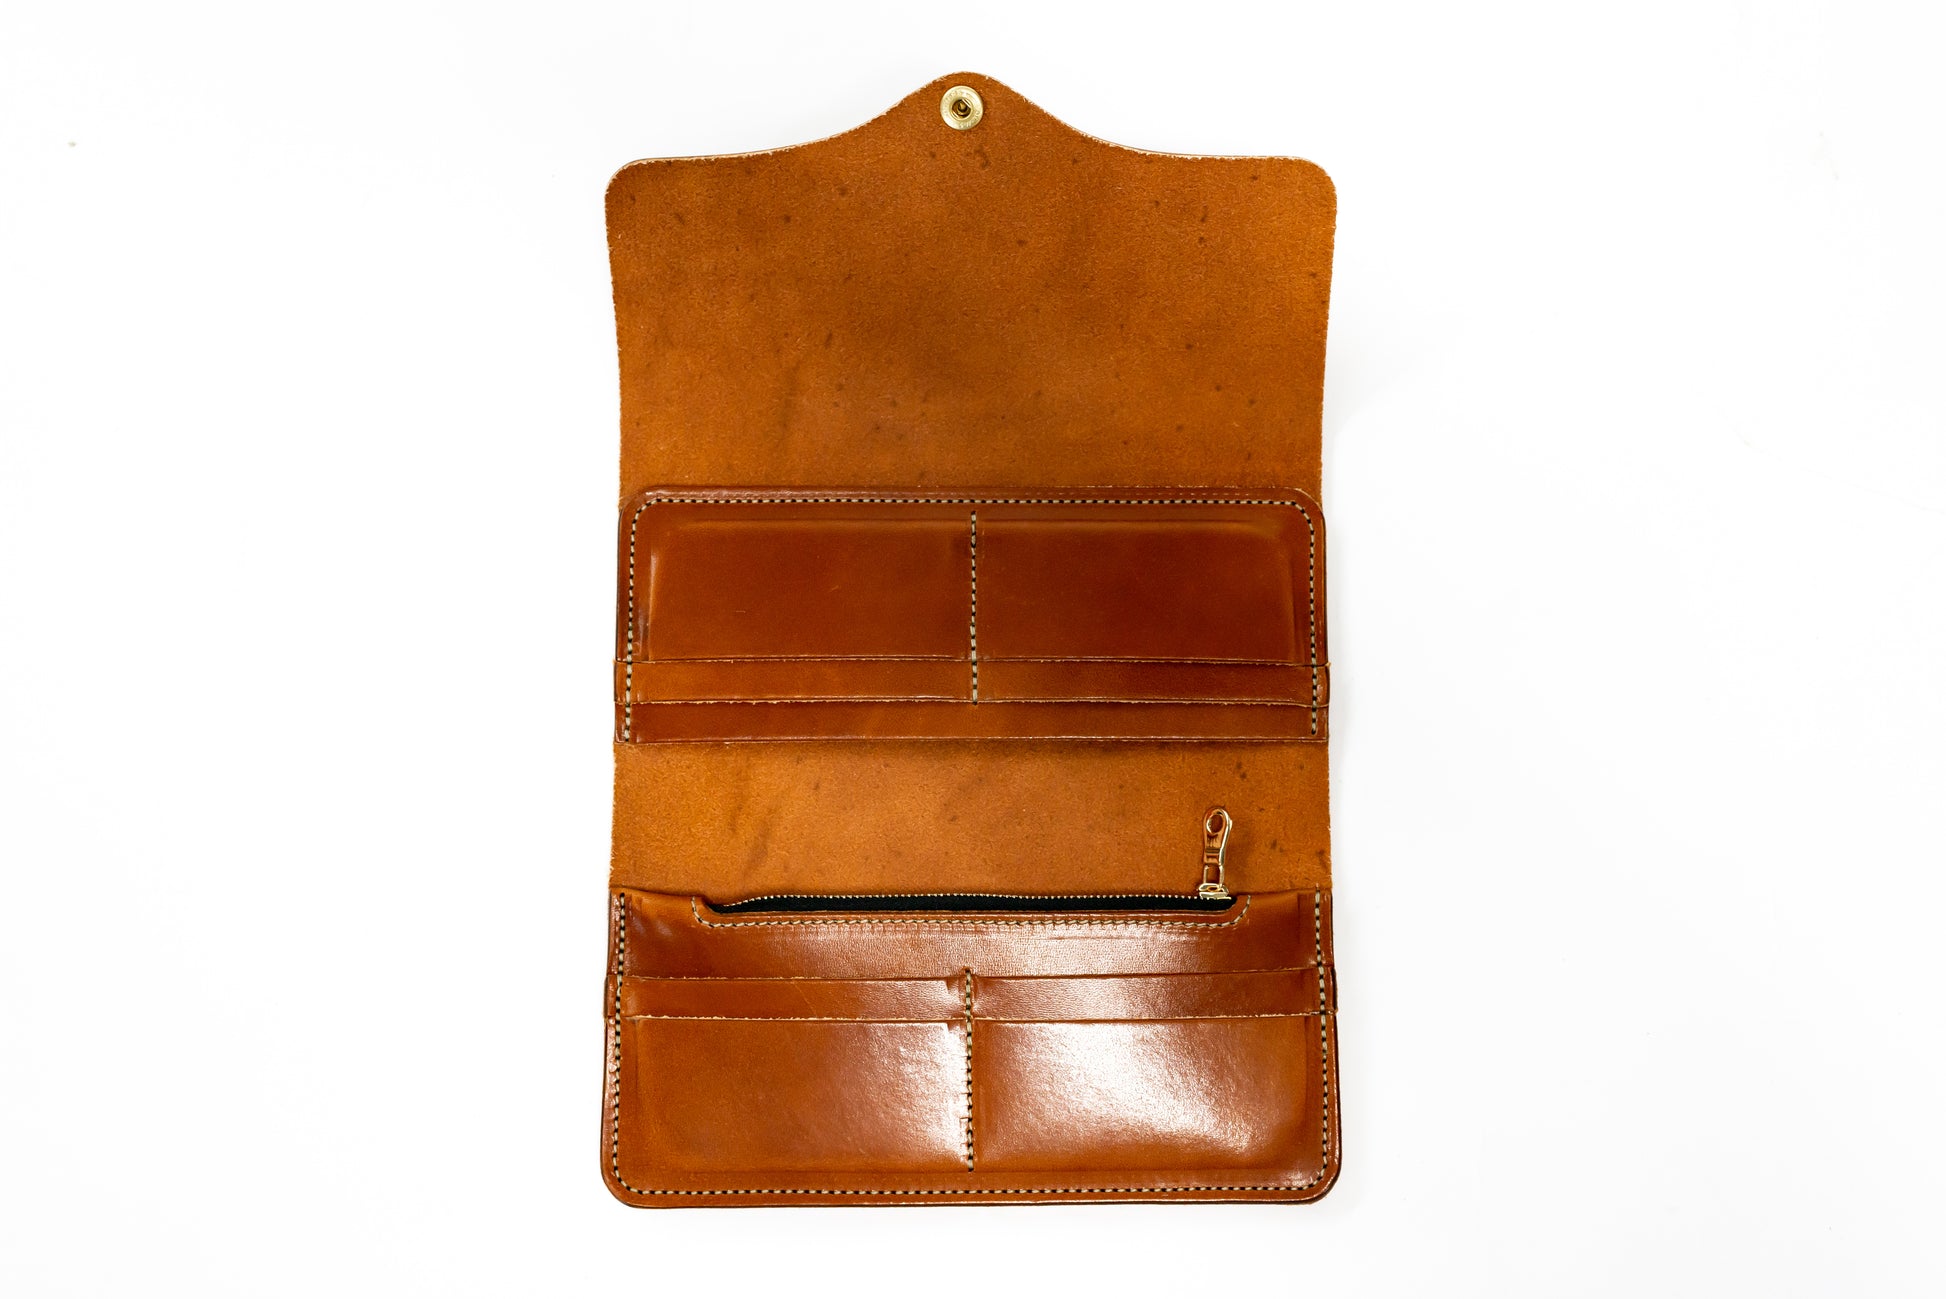 leather women's leather clutch long wallet – North End Bag Company